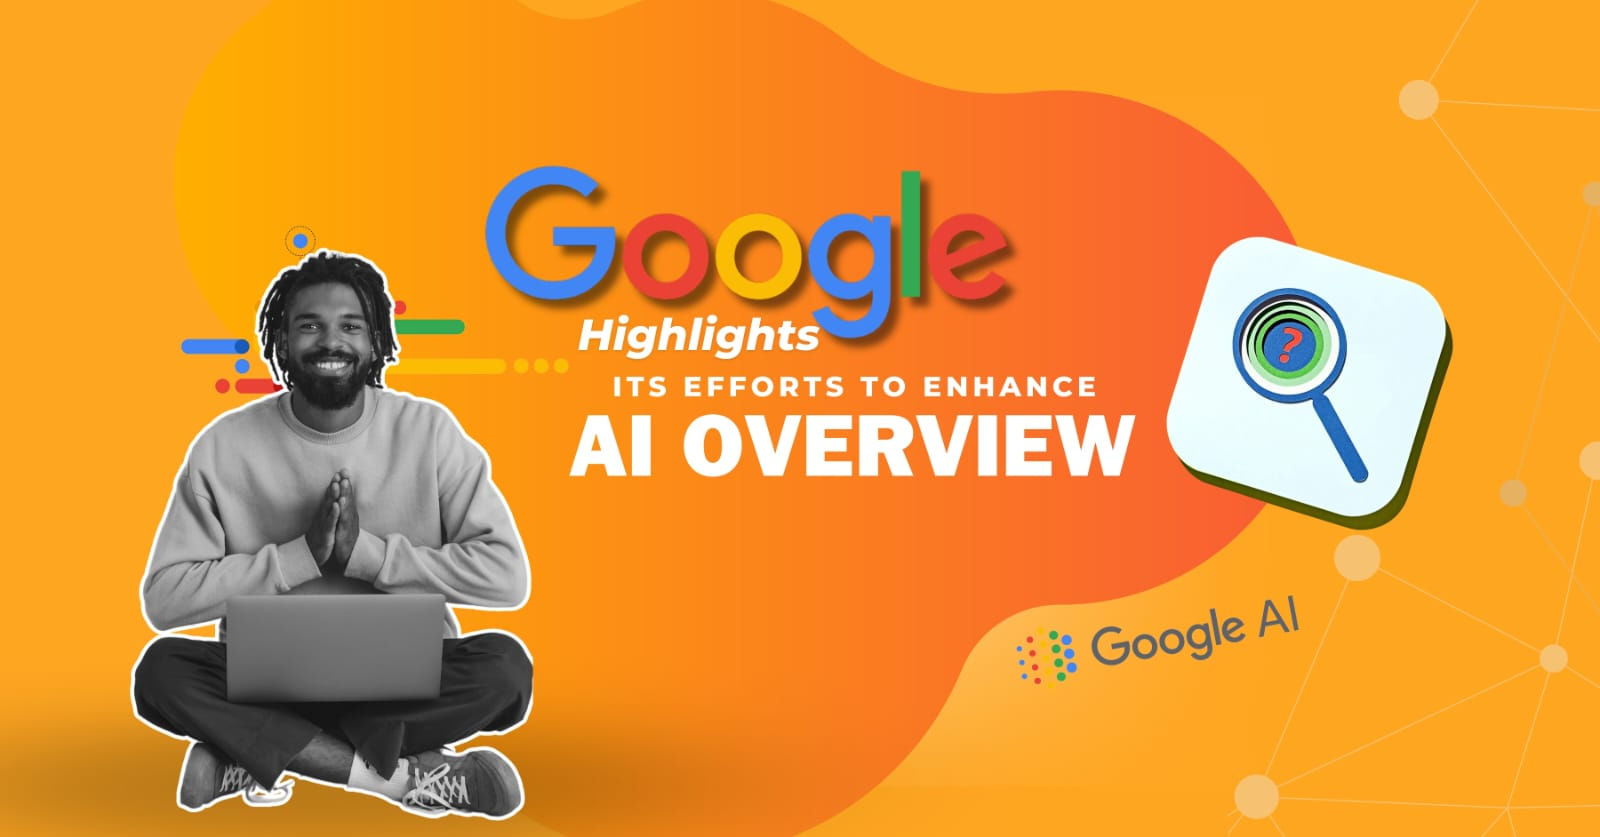 Google Highlights Its Efforts to Enhance AI Overviews